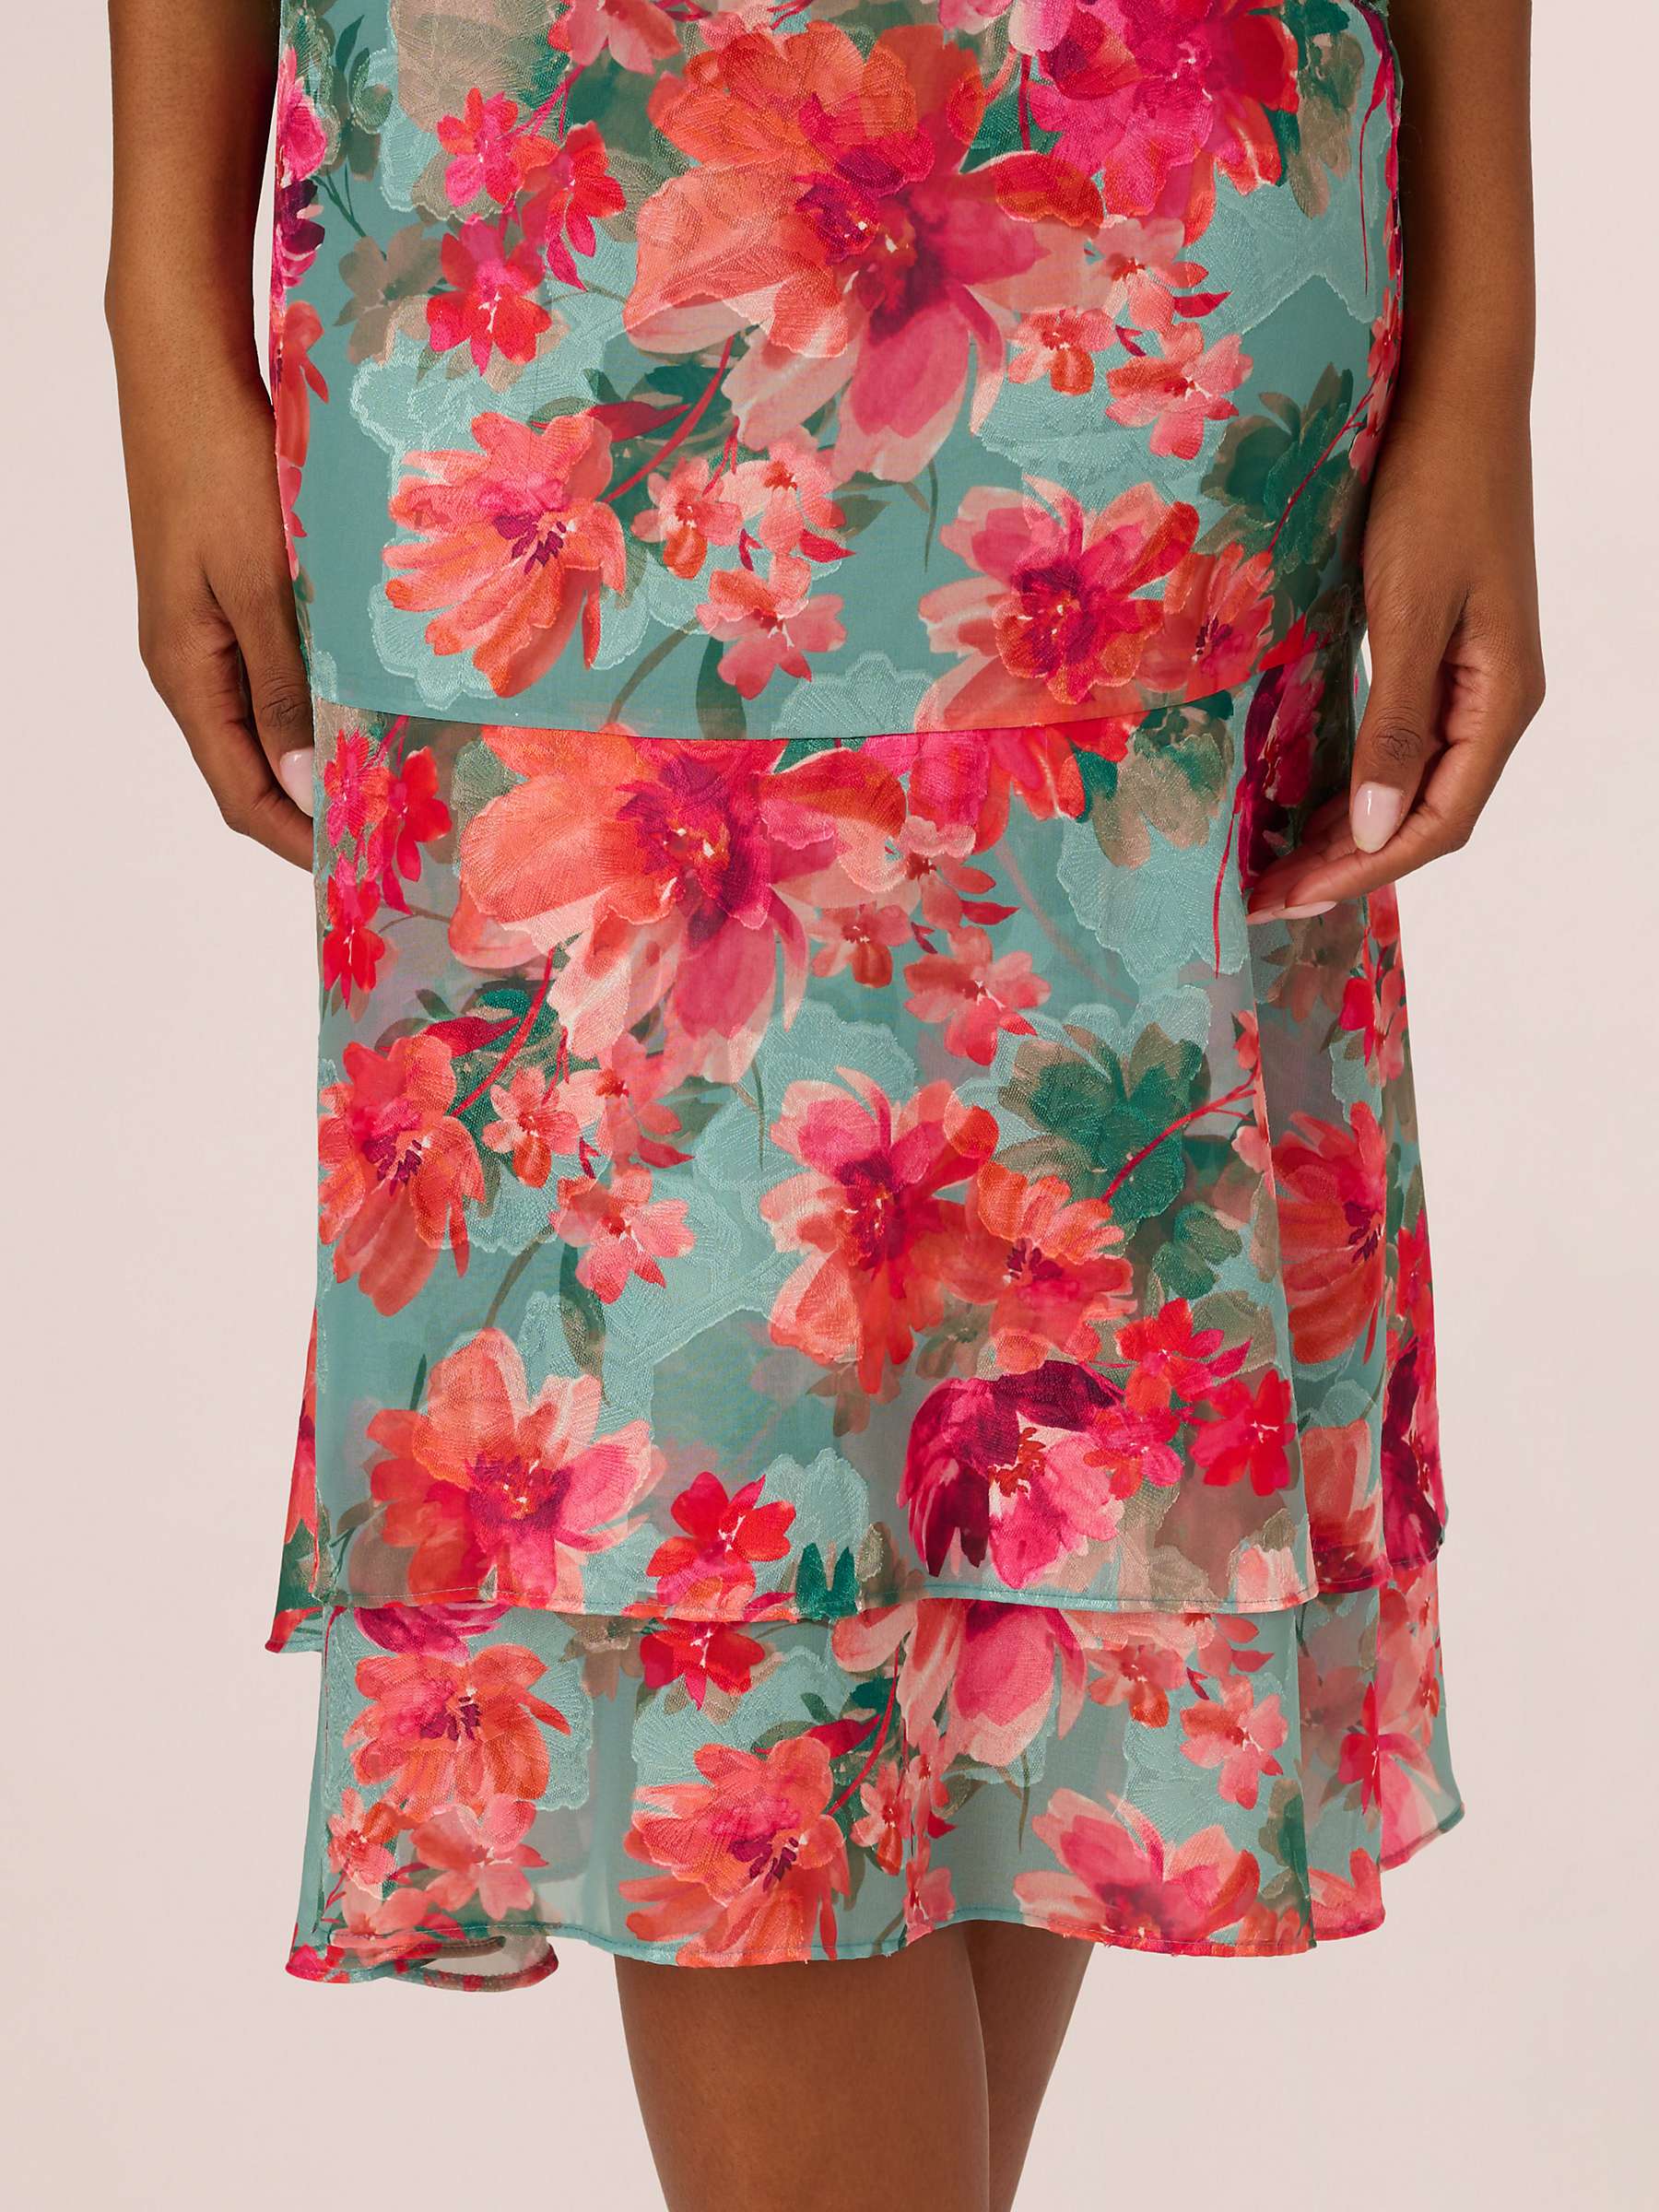 Buy Adrianna Papell V-Neck Floral Midi Dress, Turquoise/Multi Online at johnlewis.com